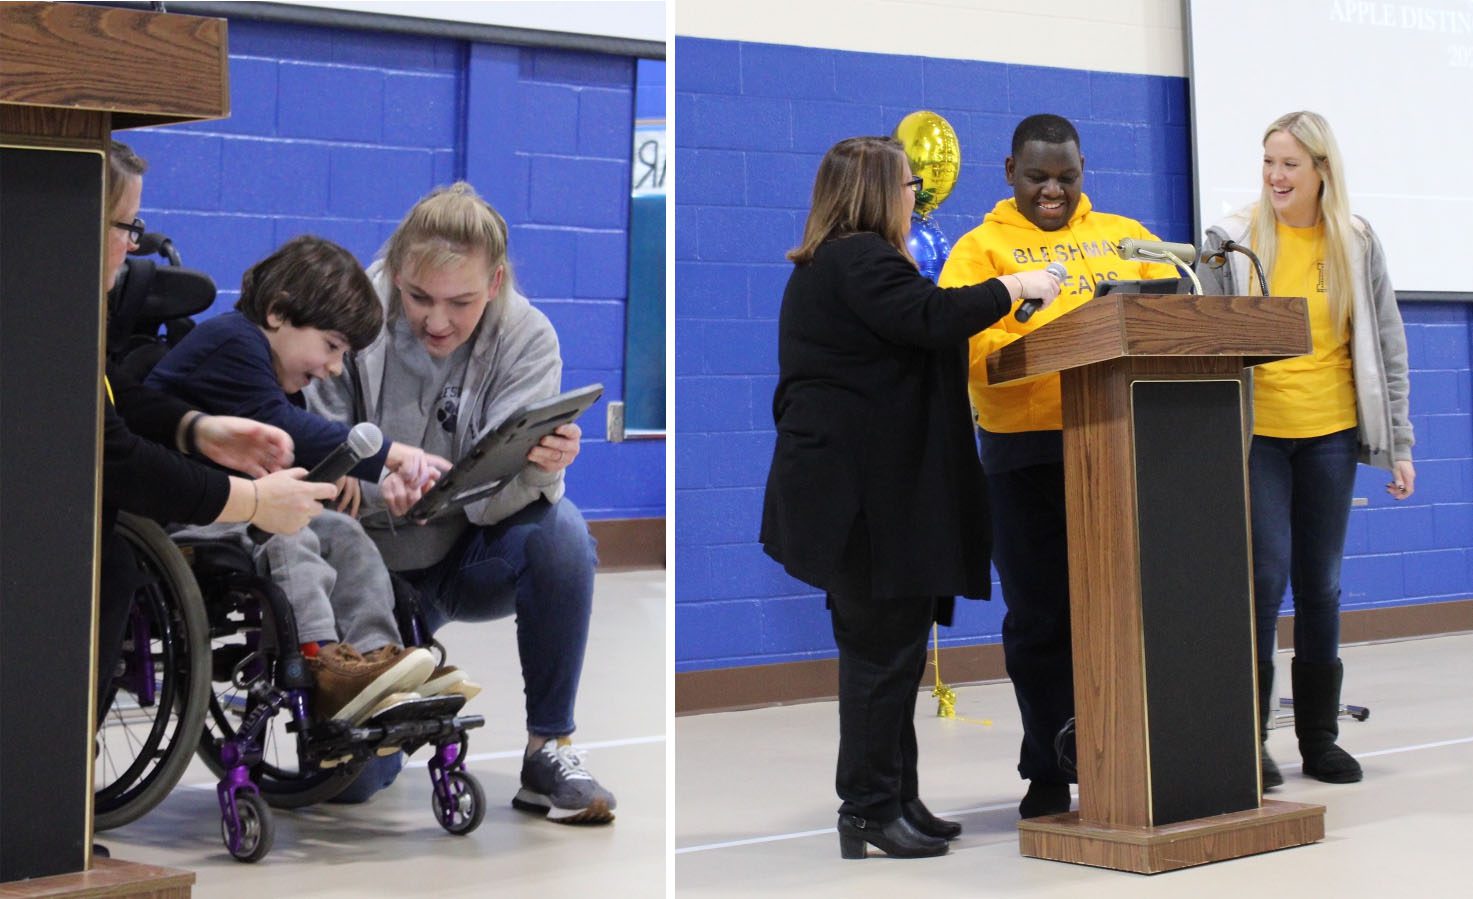 A student in a wheelchair accompanied by his teacher’s aid uses his communication device to talk about how he uses technology while the principal holds the microphone up to the device so the crowd can hear it. A student in a yellow sweatshirt stands at the podium with his teacher’s aid and the school principal and smiles as he addresses the crowd.